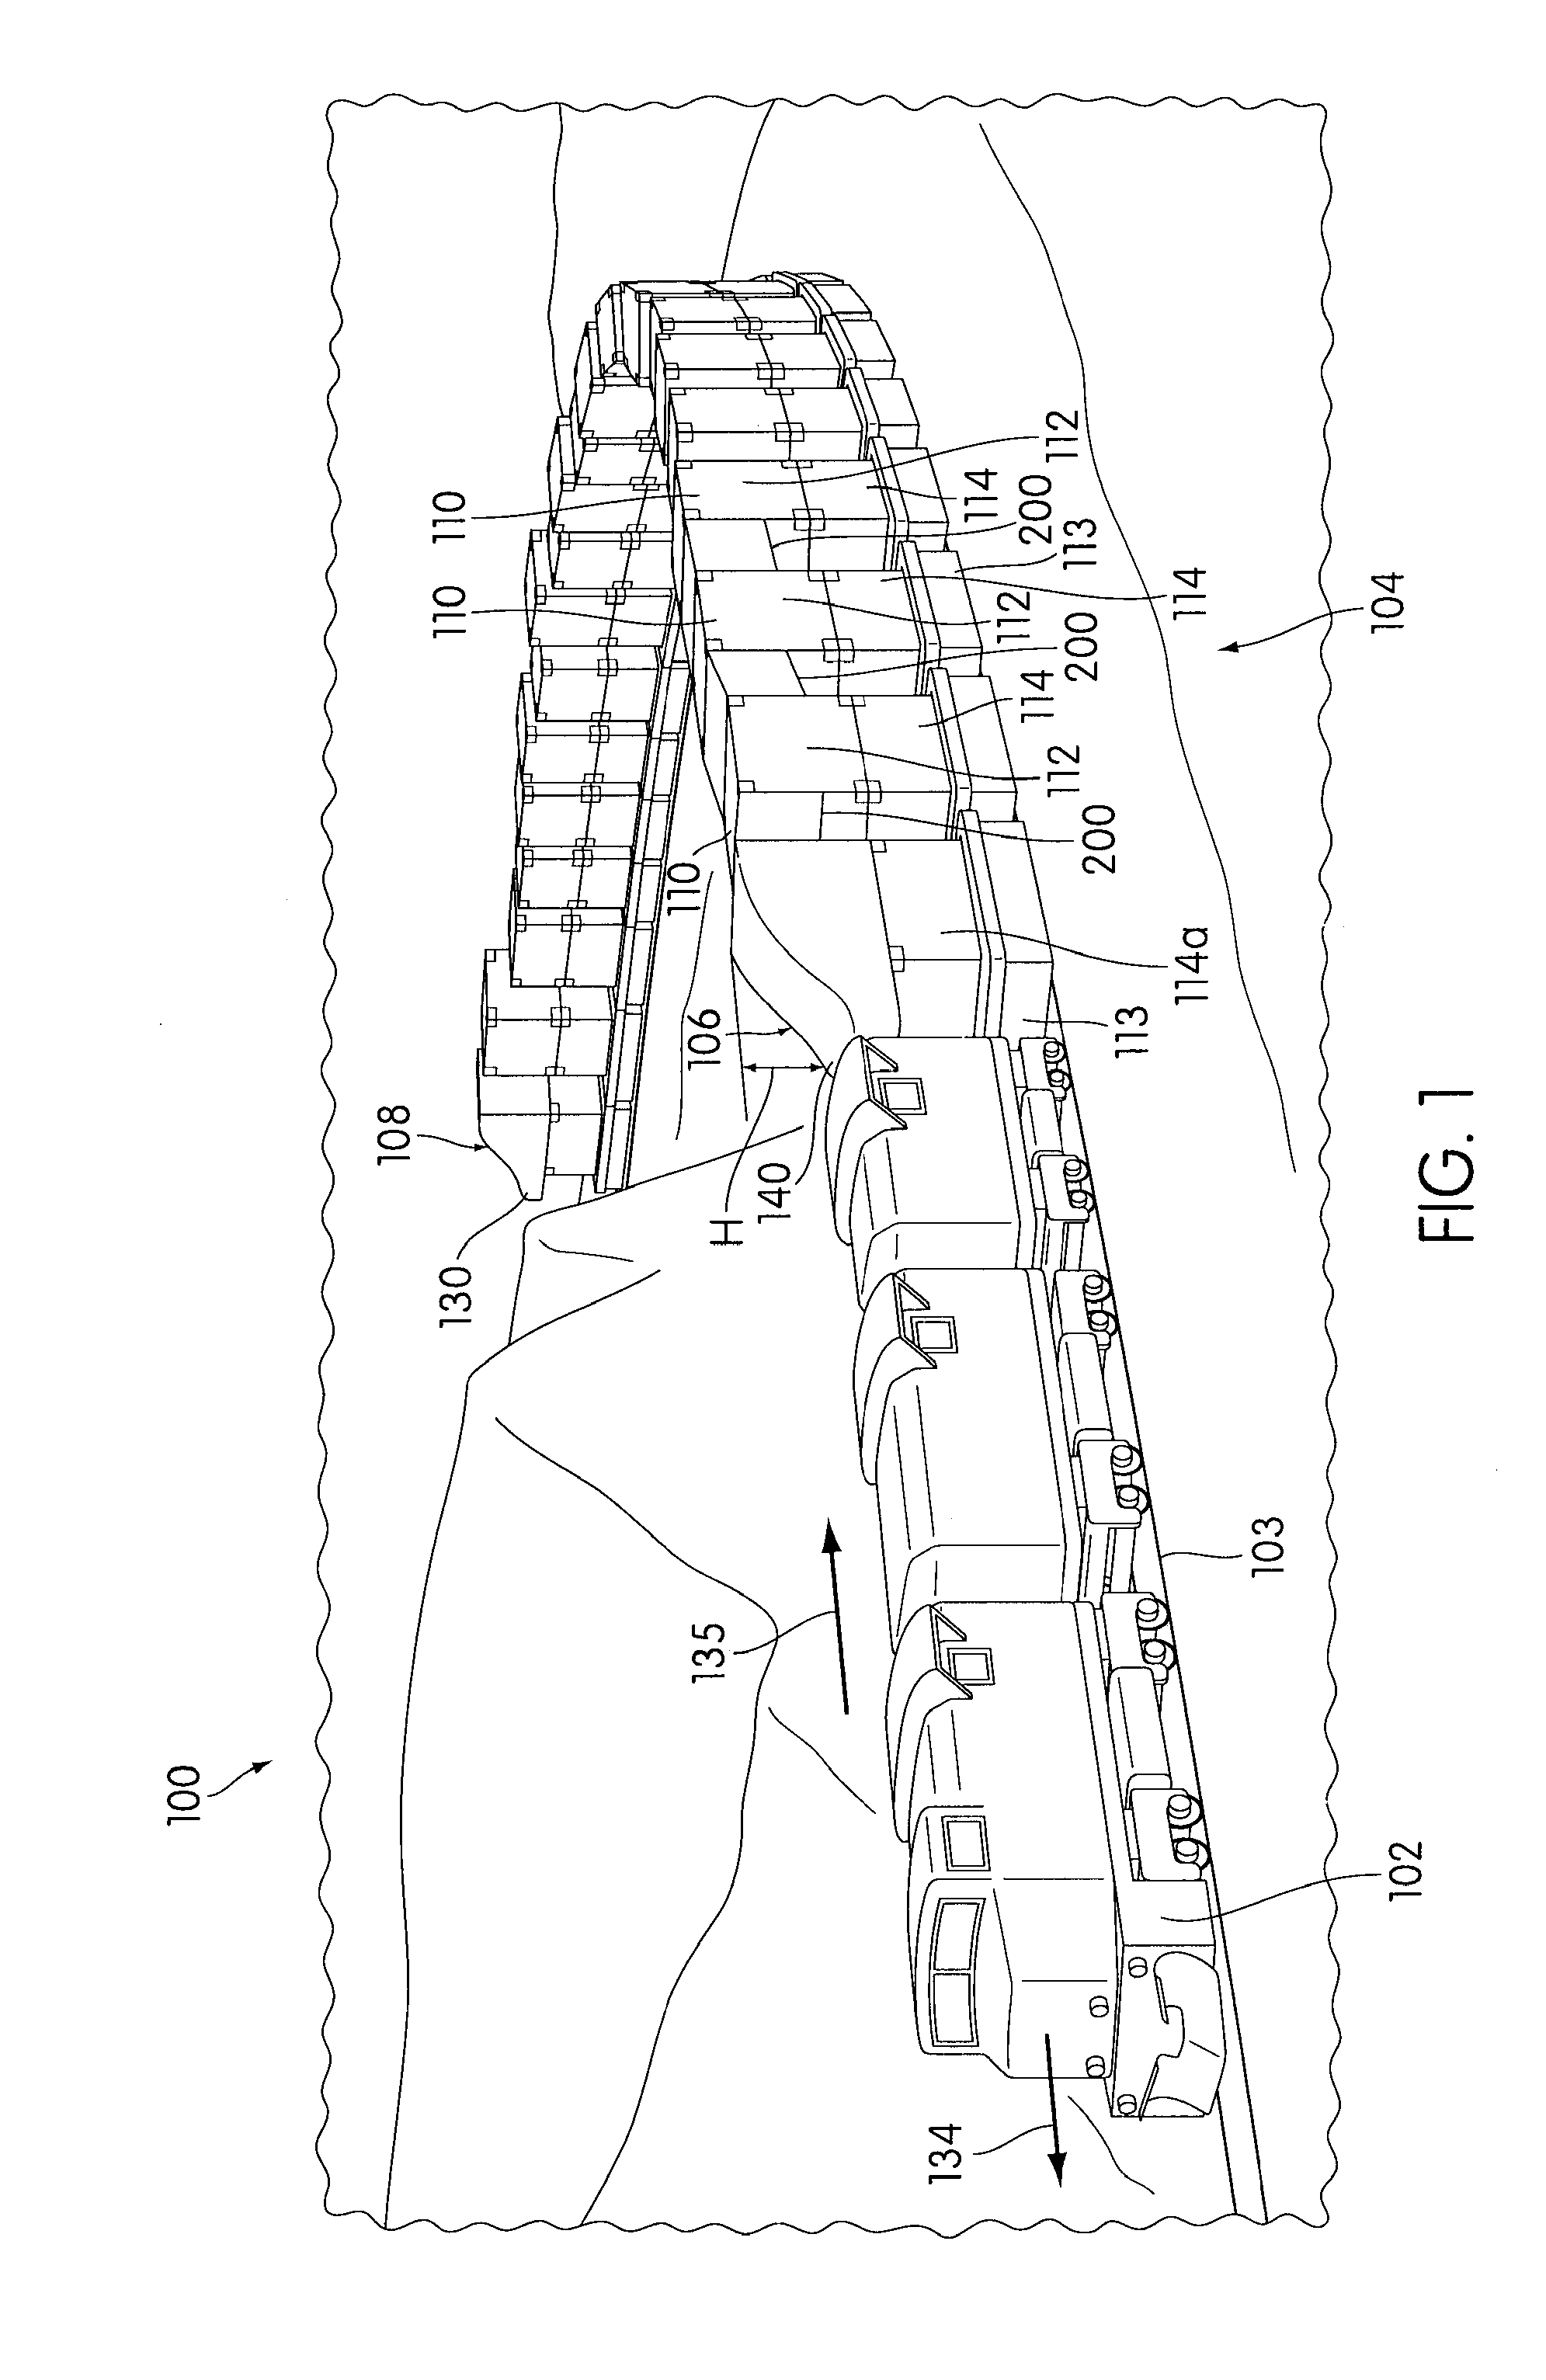 Aerodynamic pseudocontainers for reducing drag associated with stacked intermodal containers